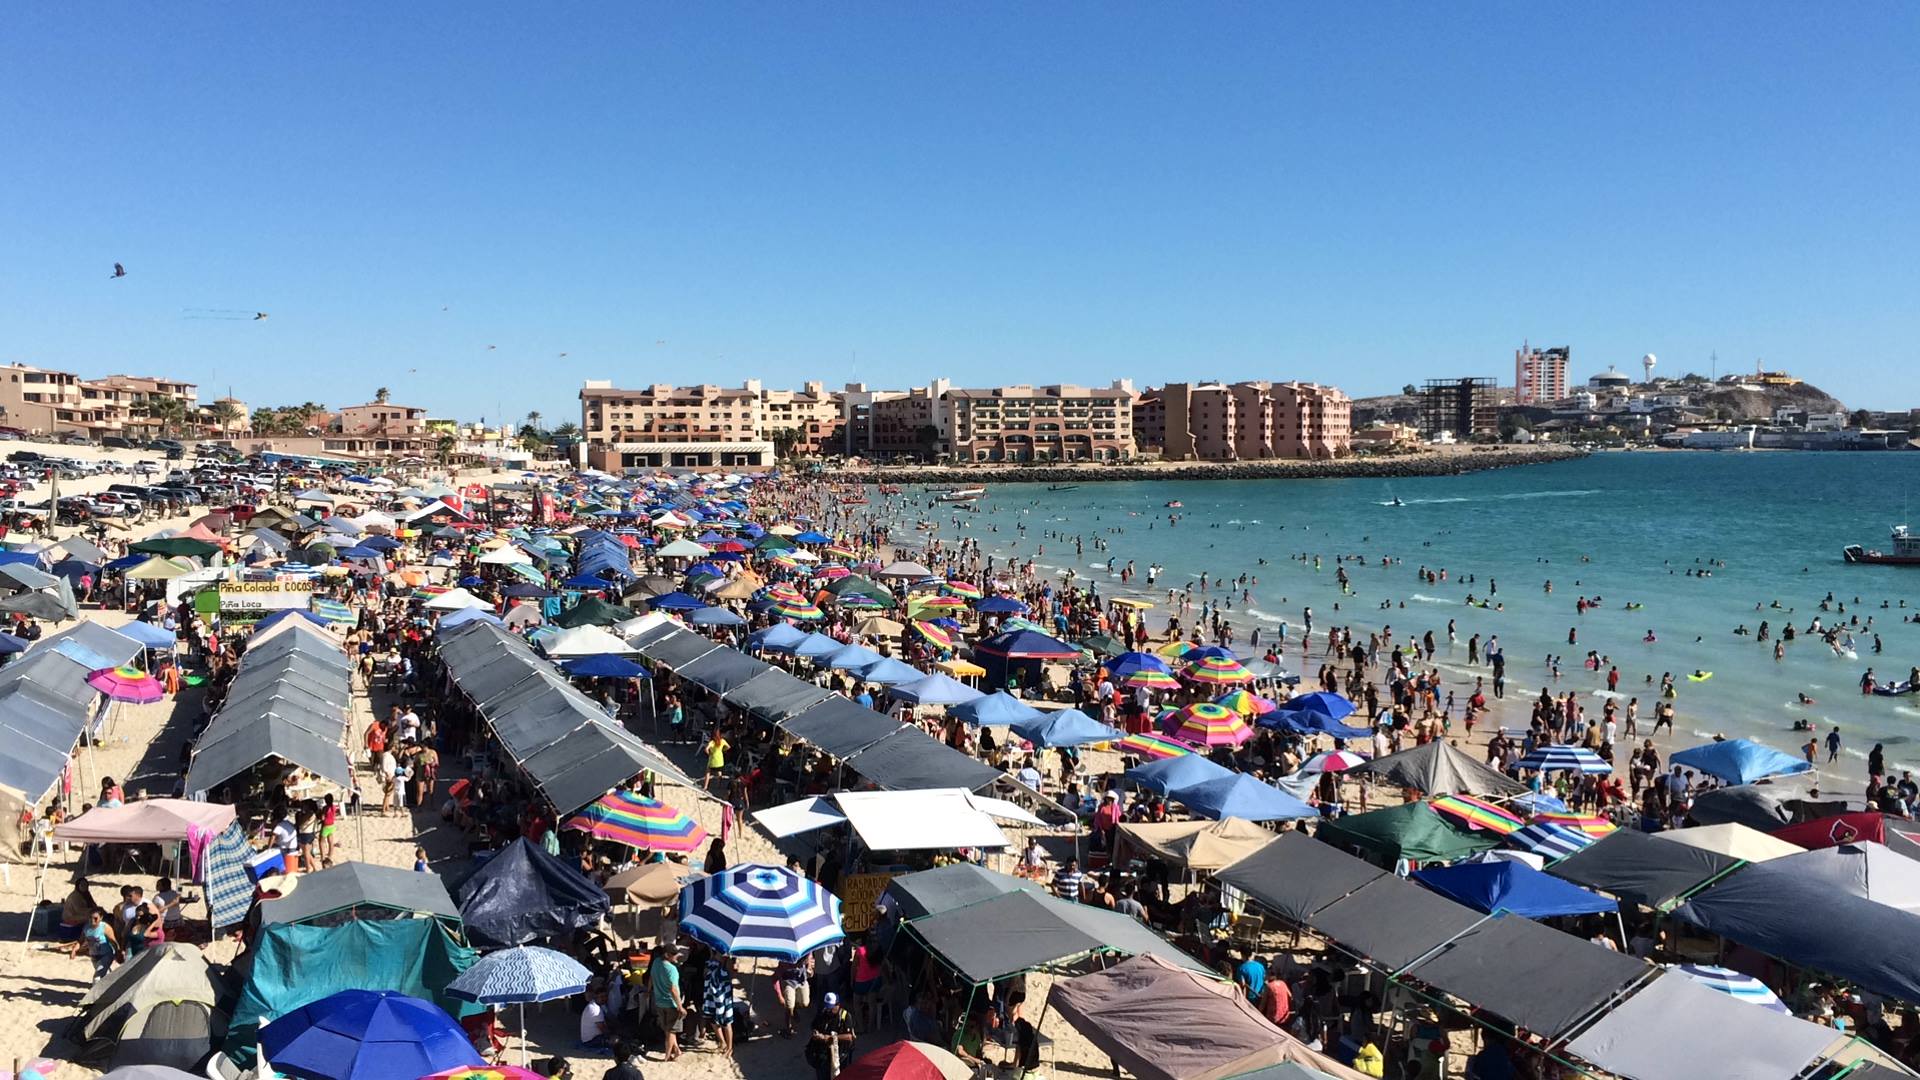 Over 50 thousand have visited Puerto Peñasco “Rocky Point” and 20